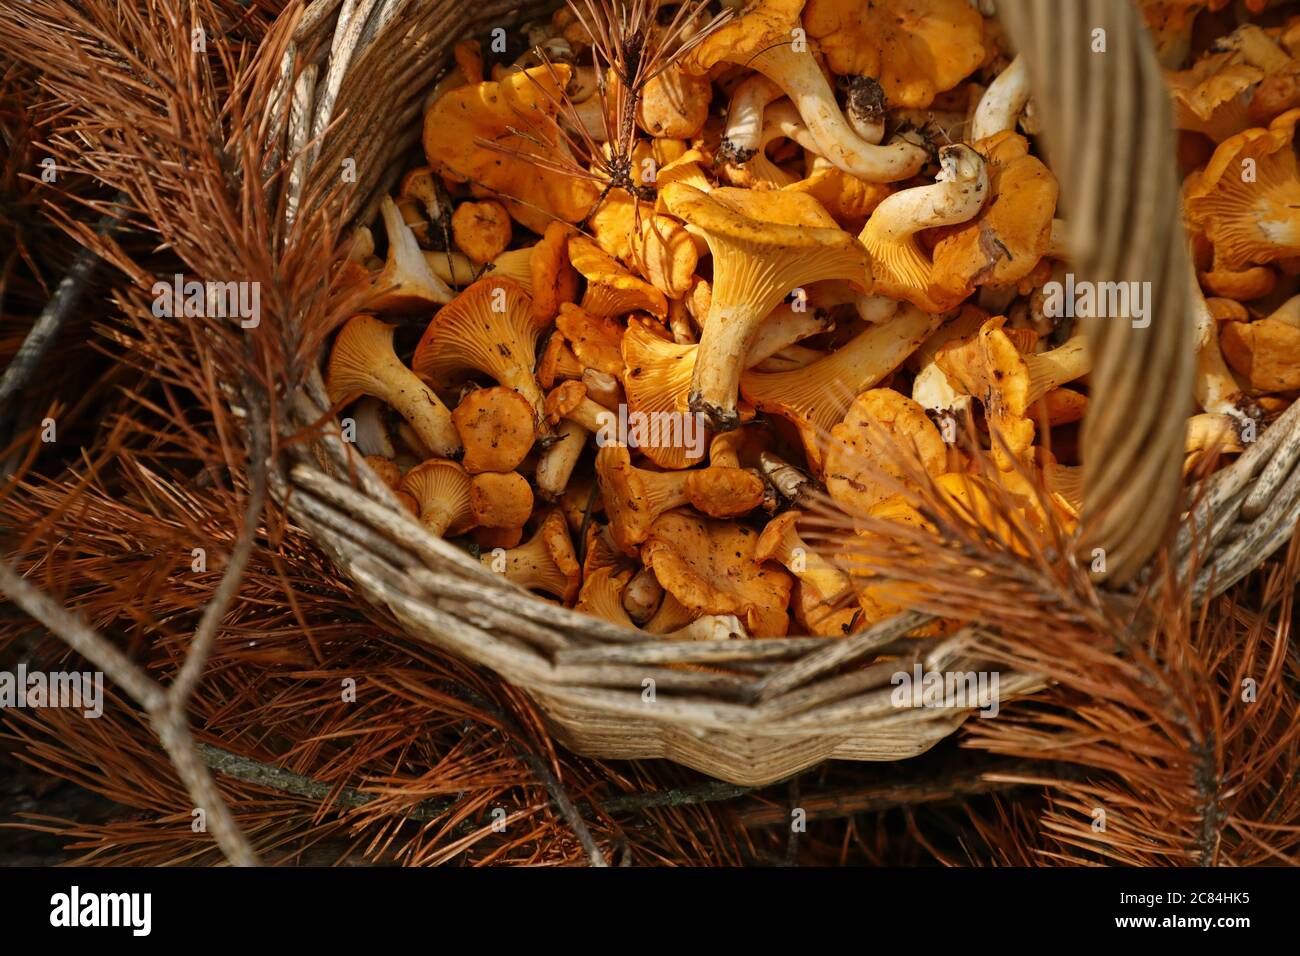 Mushroom picking is the perfect leisure in these corona times. In addition, many mushroom experts predict that it will be a good mushroom year this year. Here a filled mushroom basket with chanterelles (Cantharellus cibarius). Photo Jeppe Gustafsson Stock Photo